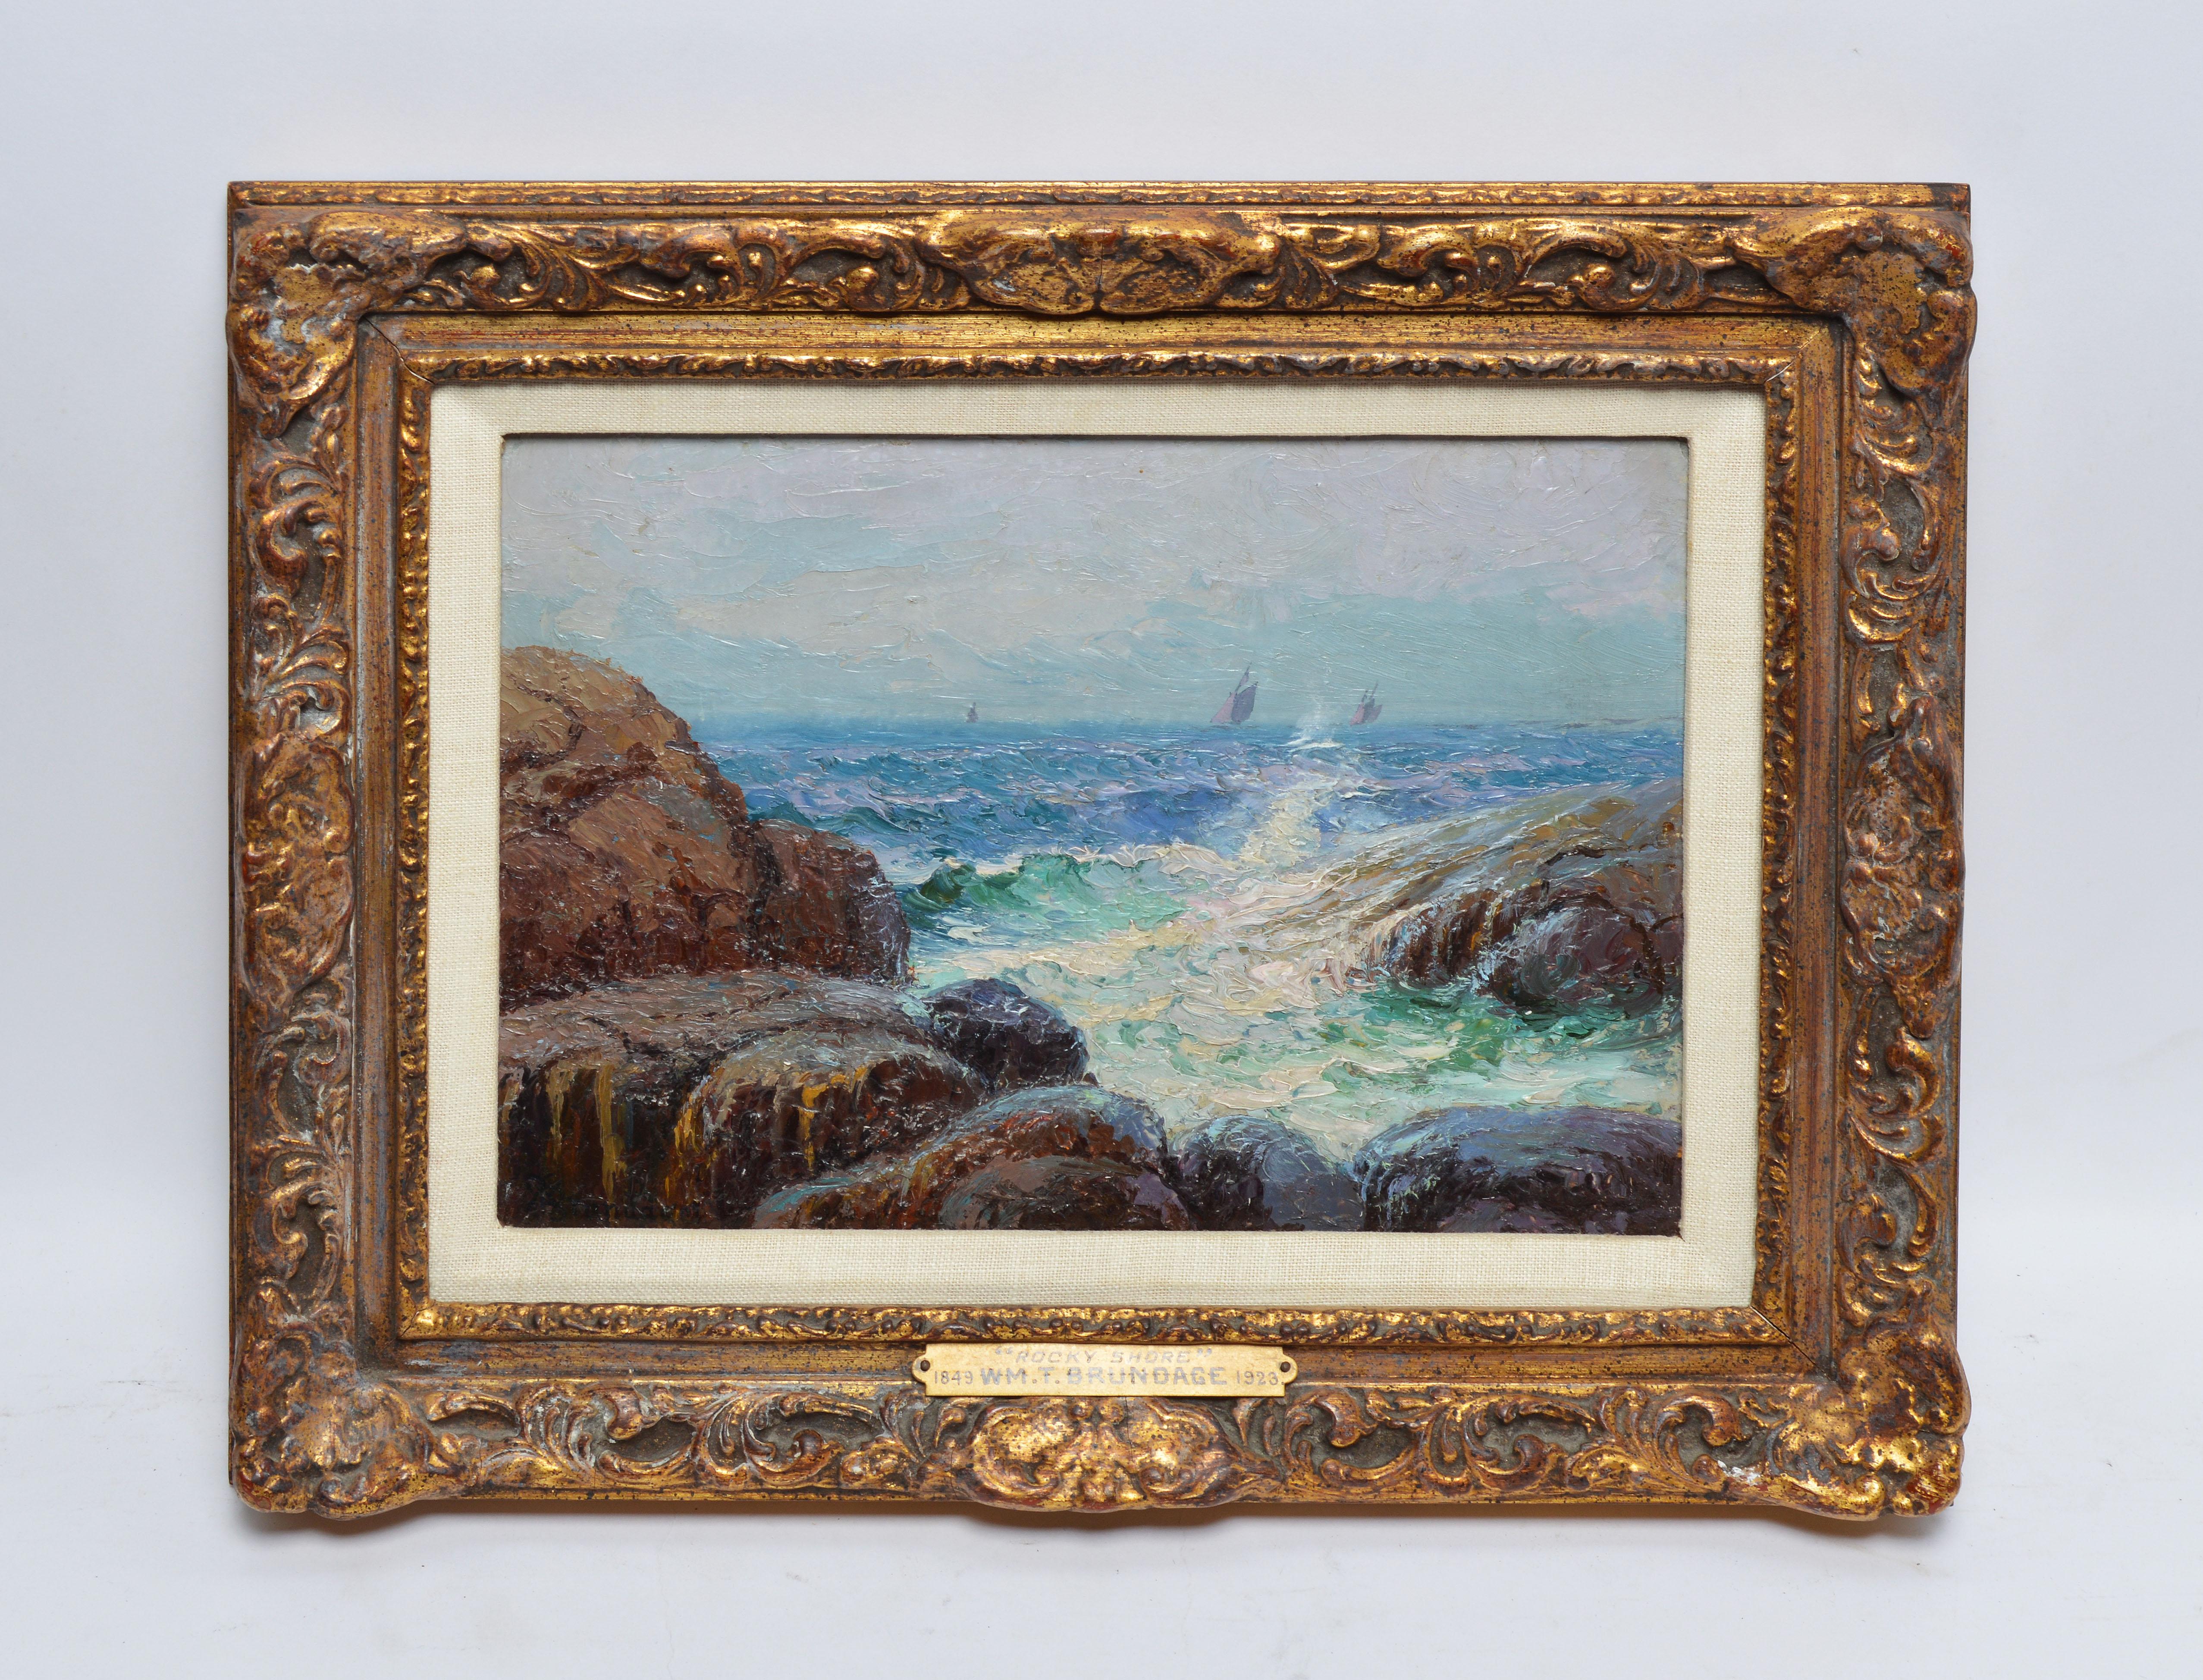 Antique Impressionist Oil Painting of A New England Coast by William Brundage 1